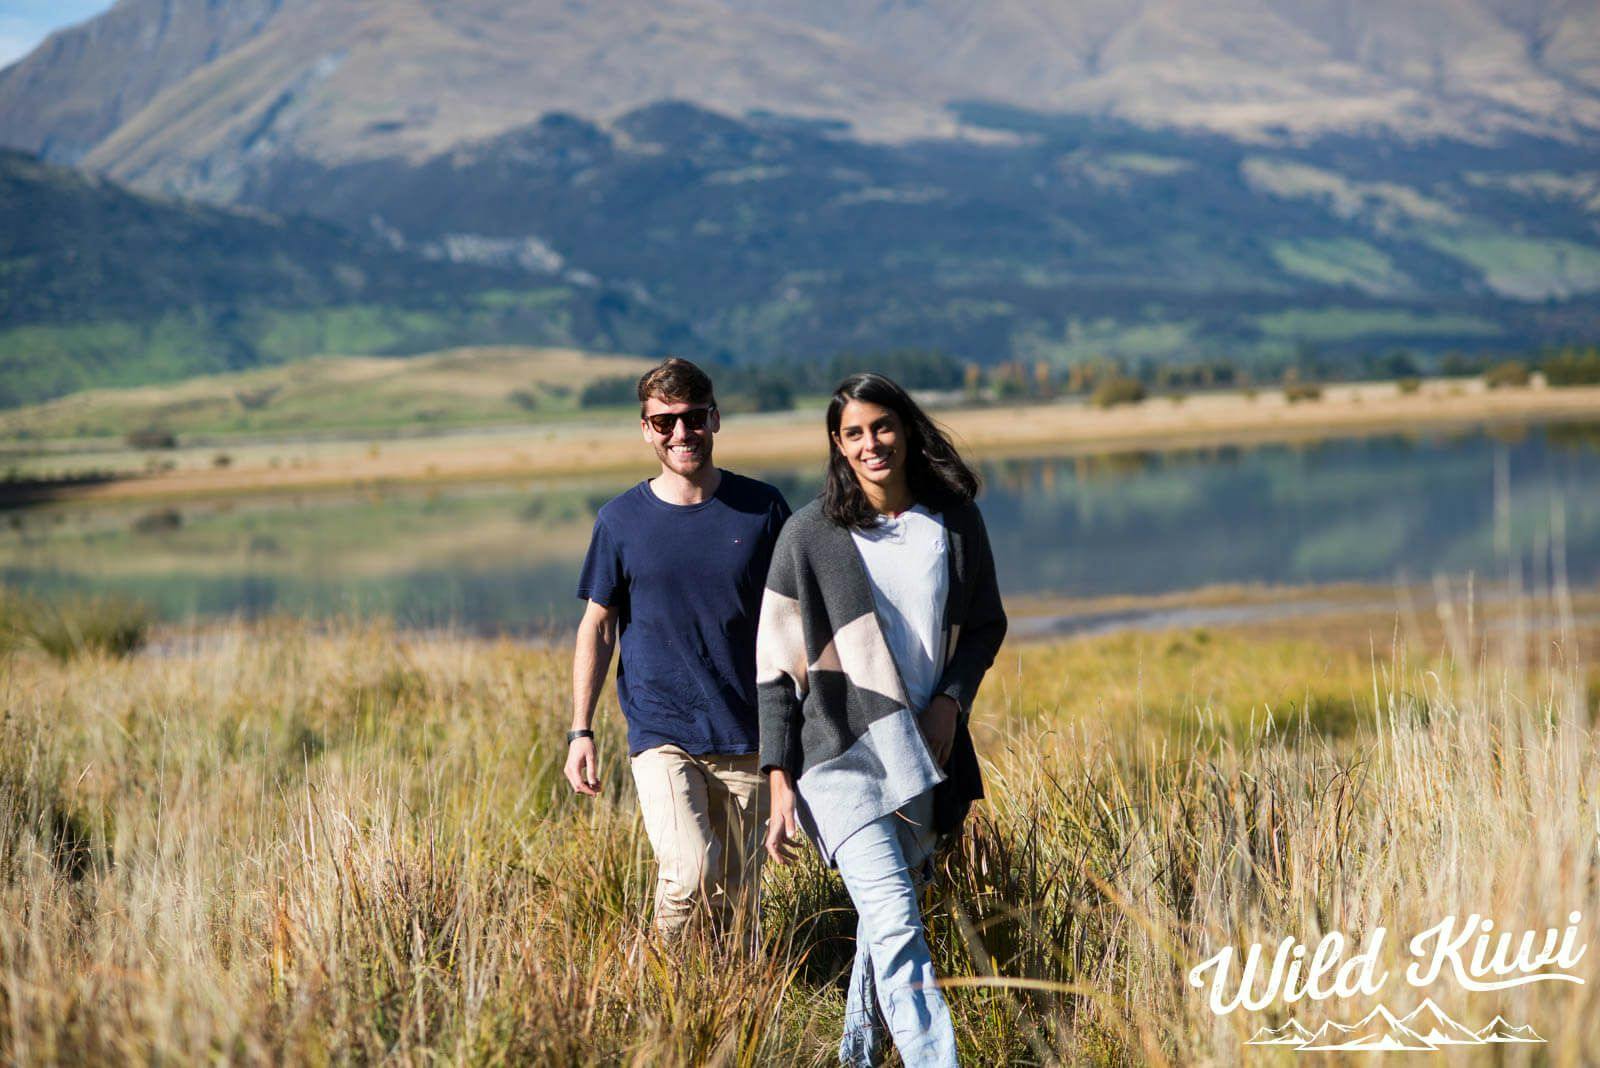 Holidays to New Zealand - Make new friends and find out something about yourself